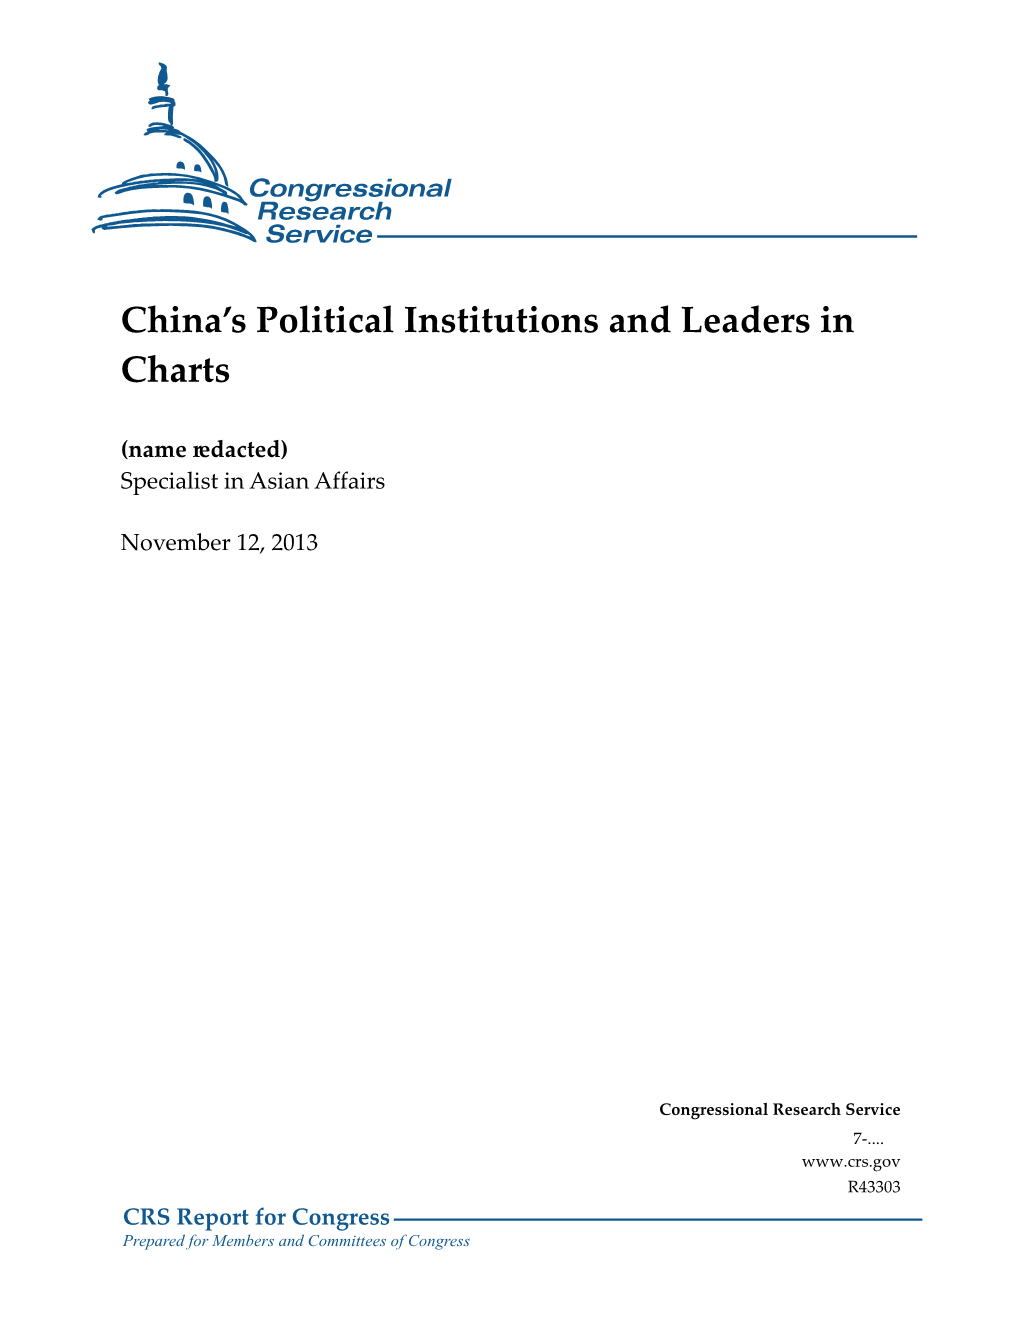 China's Political Institutions and Leaders in Charts